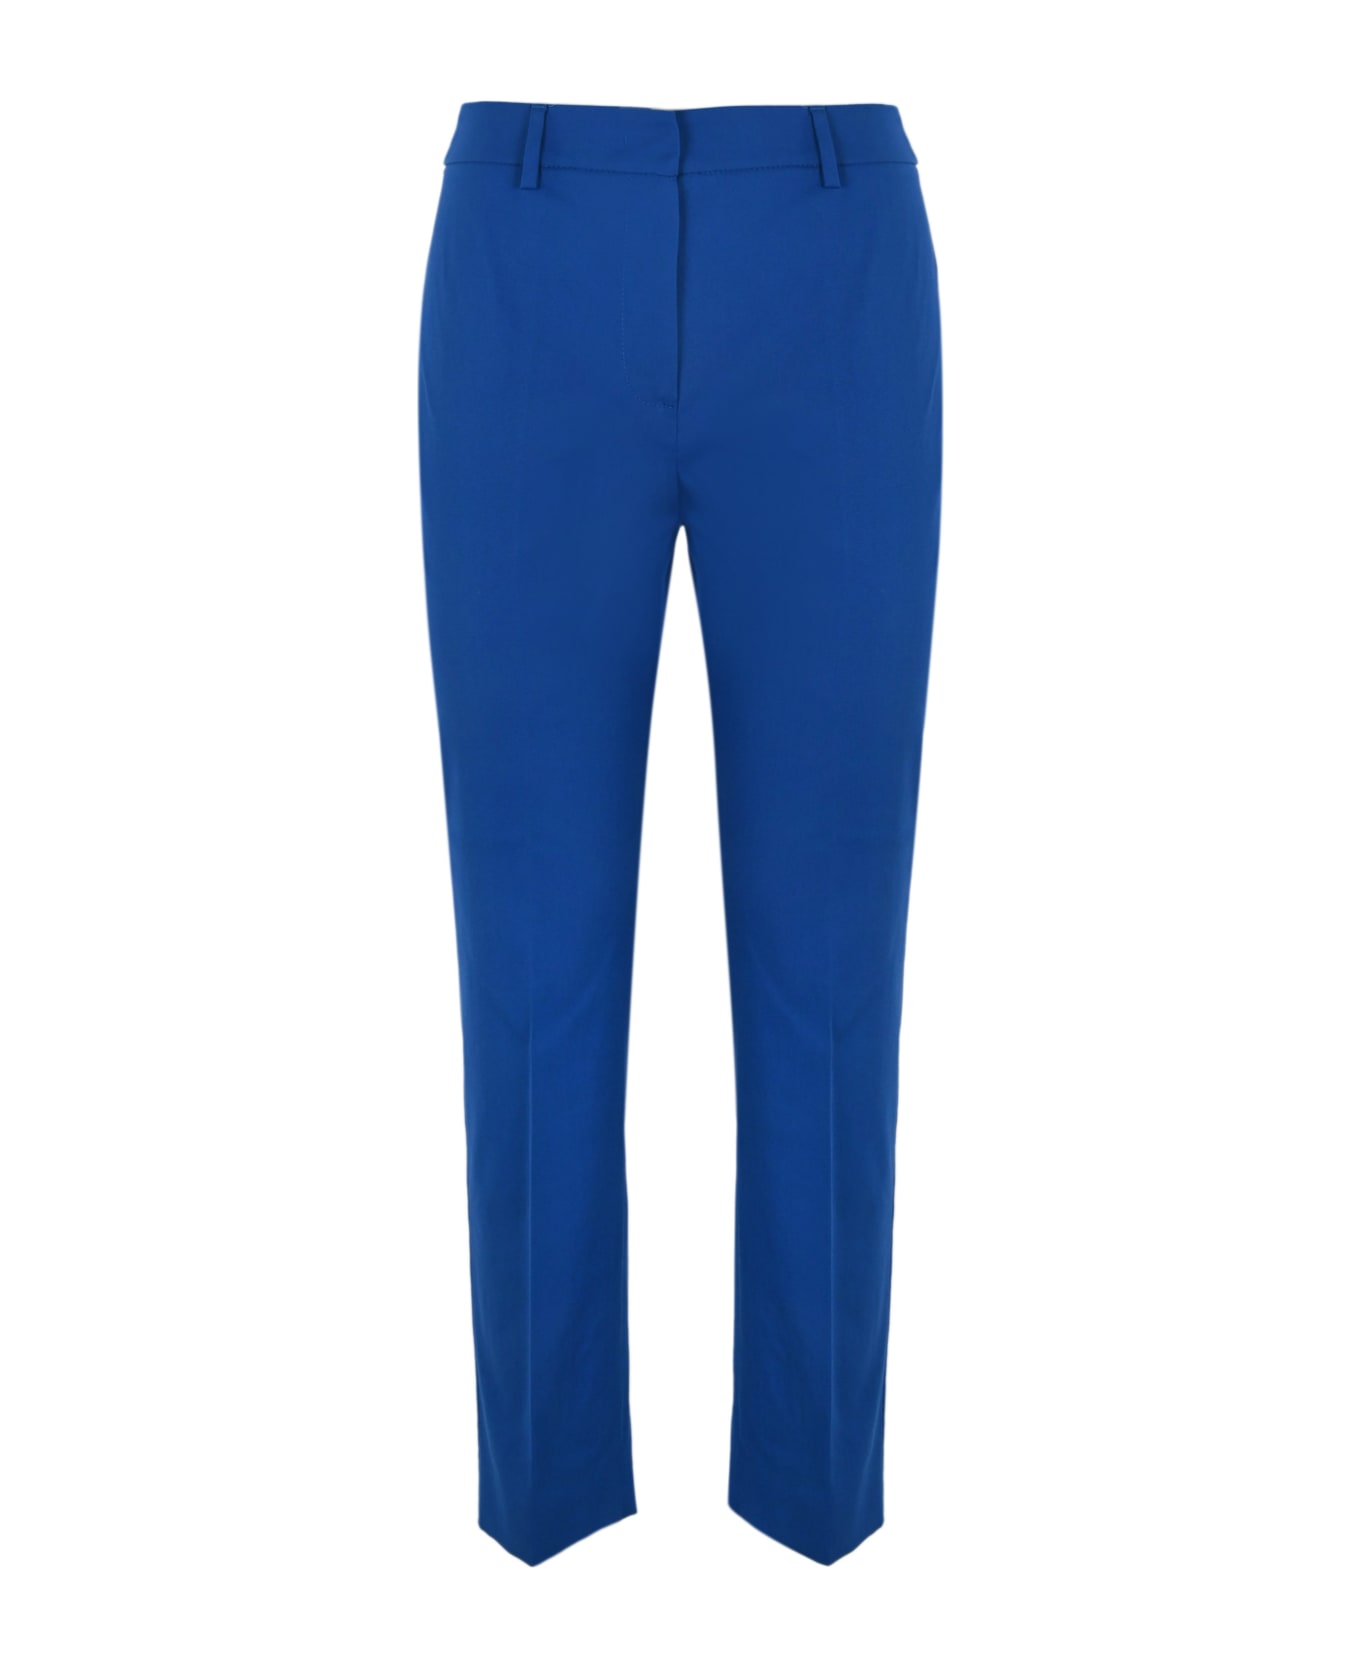 Weekend Max Mara 'cecco' Stretch Cotton Trousers - Oltremare